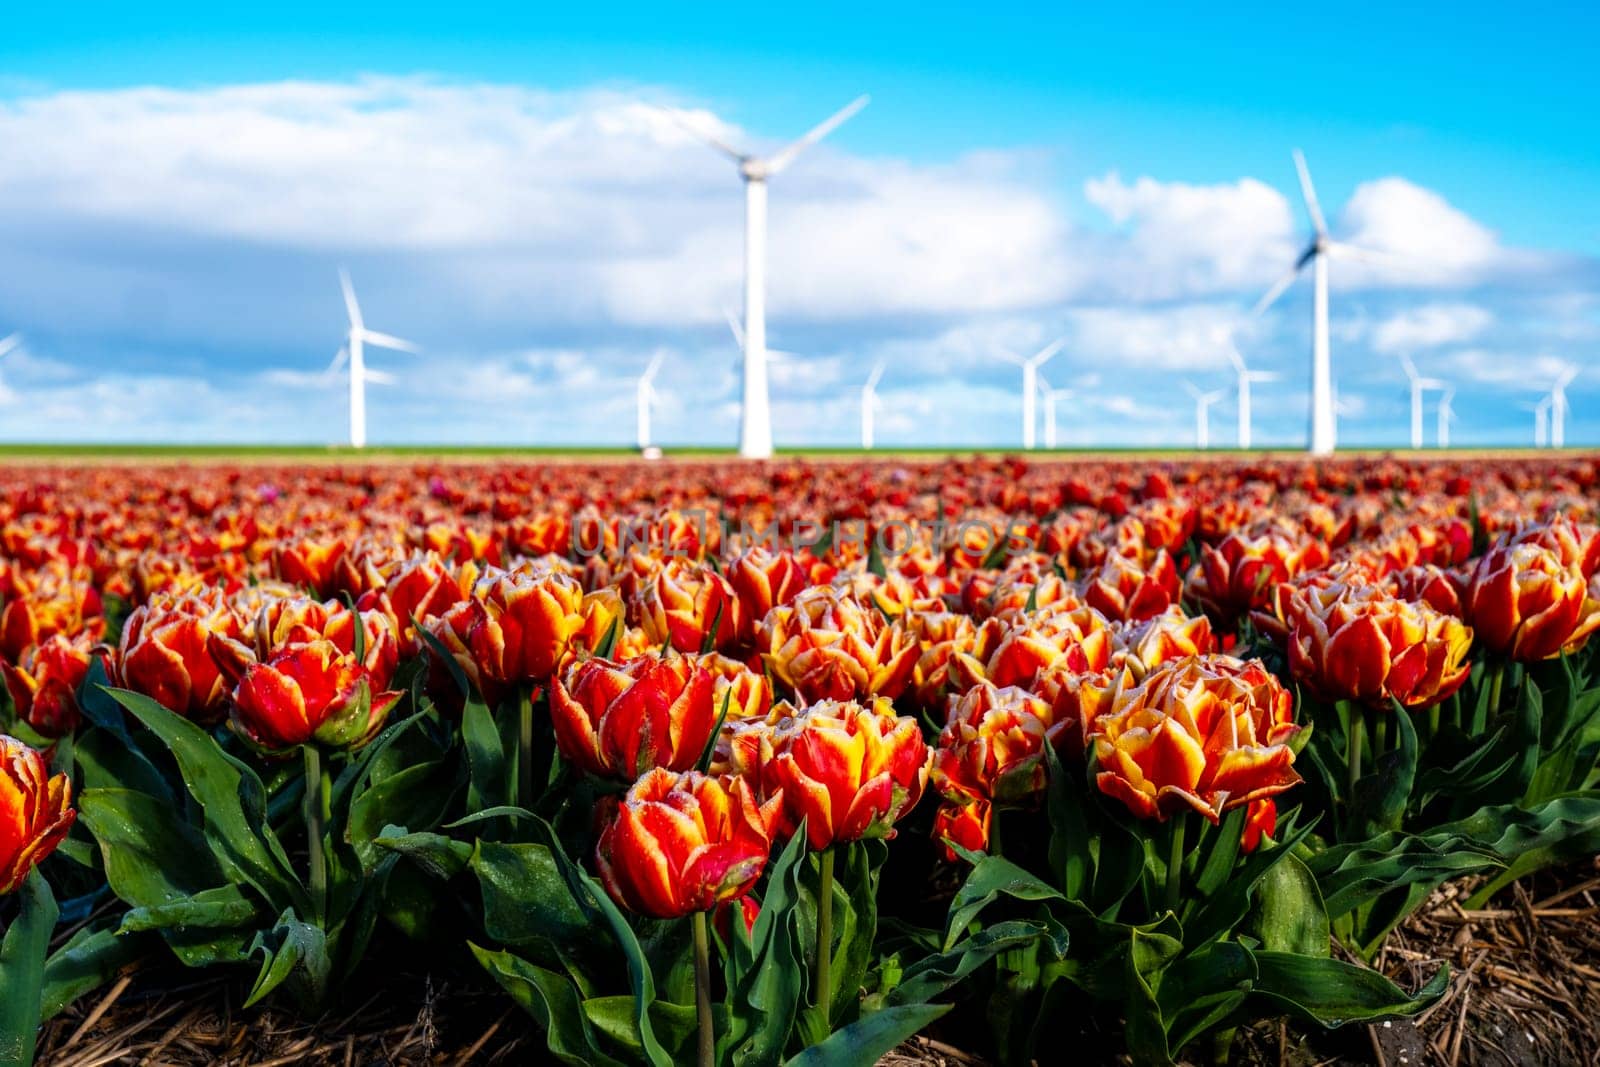 A vibrant field of red and yellow tulips sways gracefully in the spring breeze, with traditional windmills standing tall in the background by fokkebok